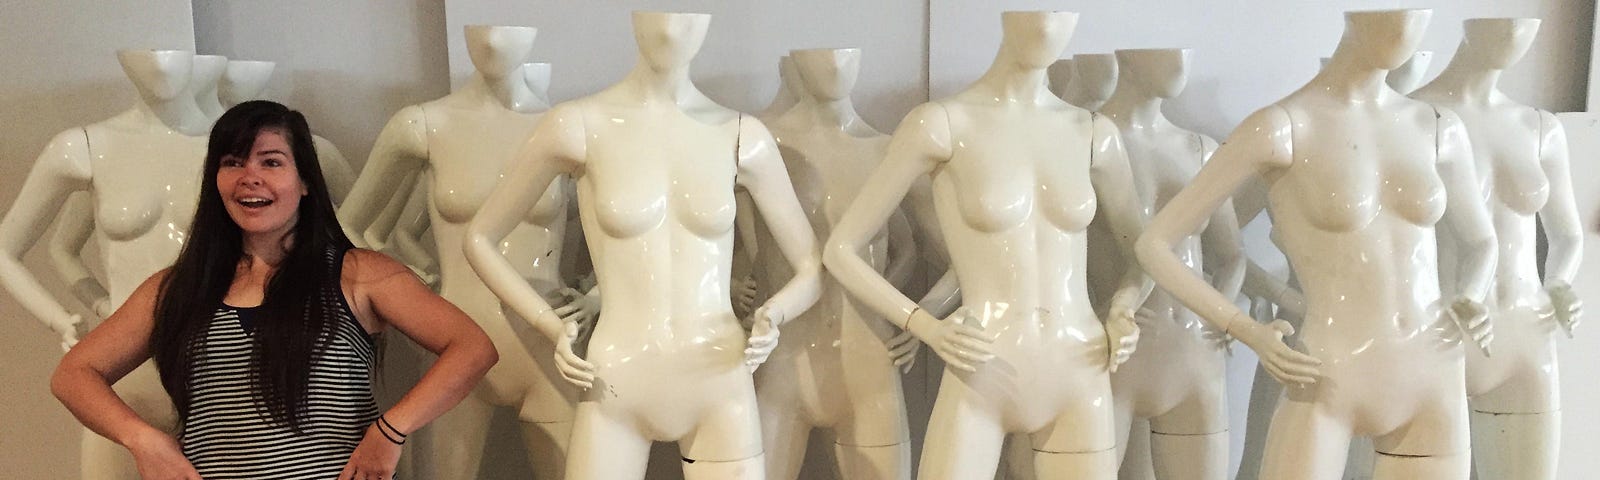 Kate Murphy standing with multiple store mannequins